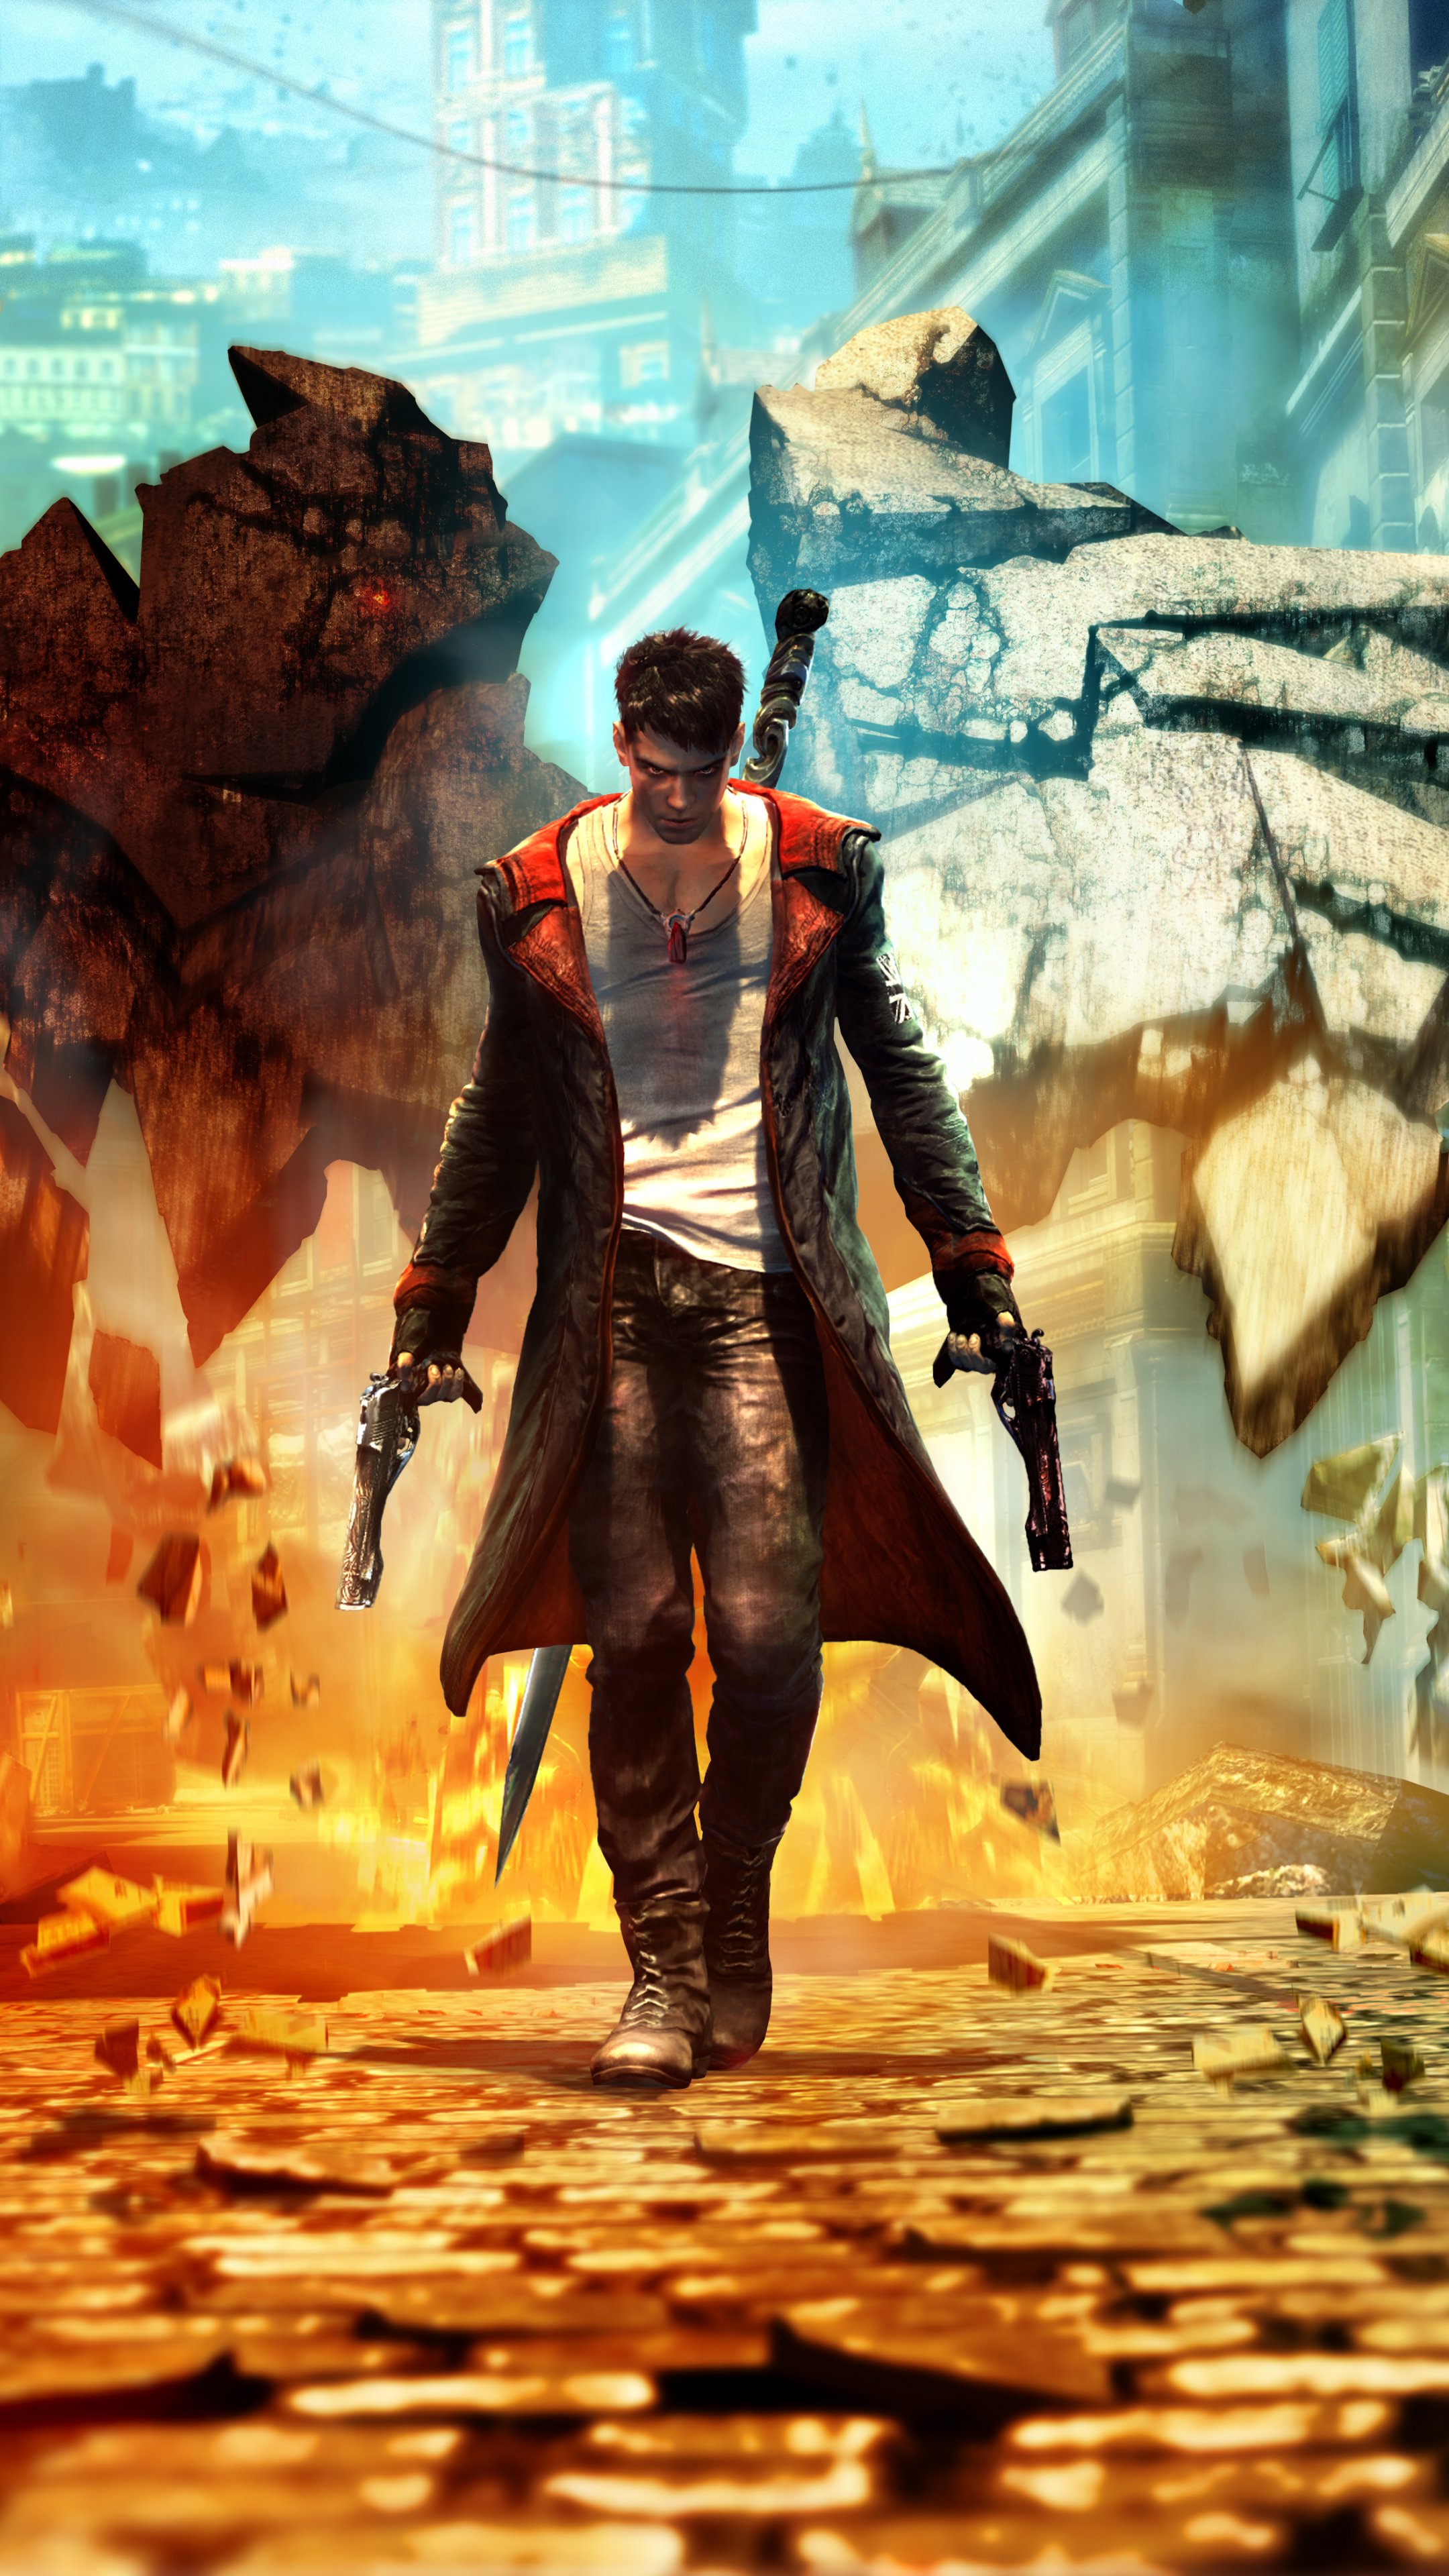  Dmc: Devil May Cry HQ Background Images